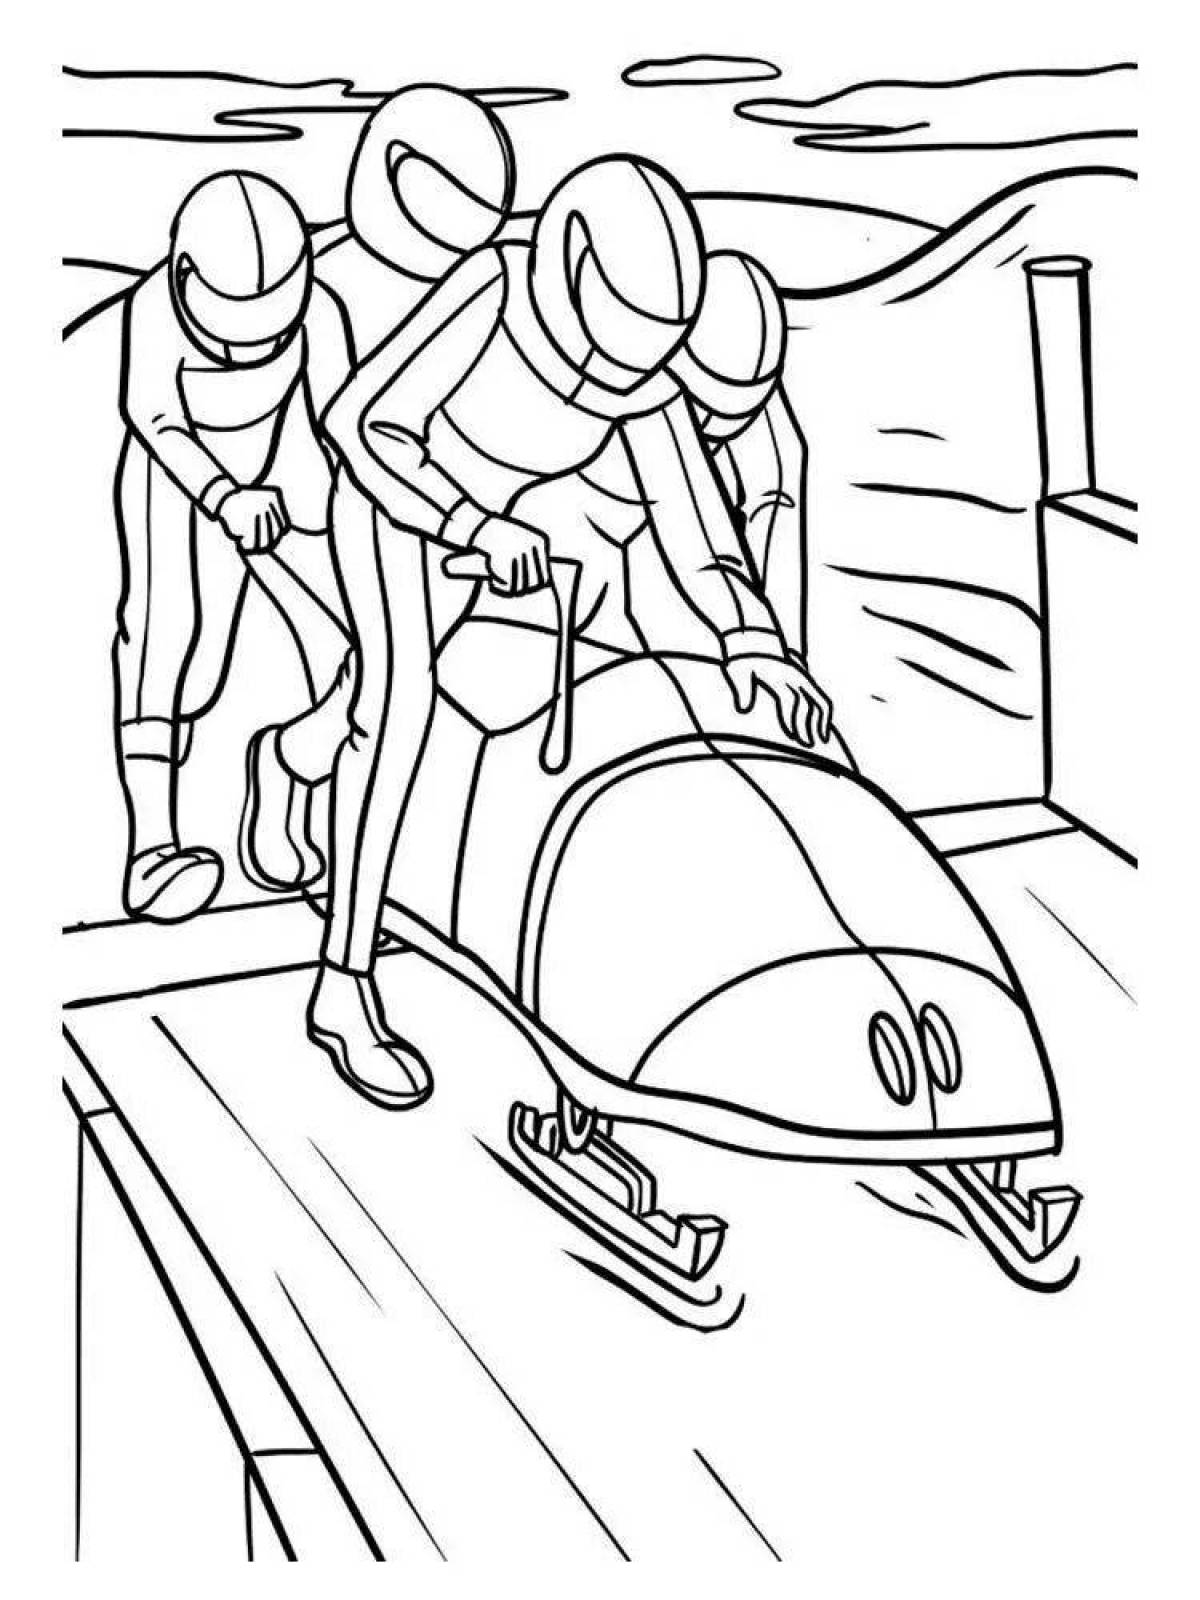 Shiny winter sports coloring page